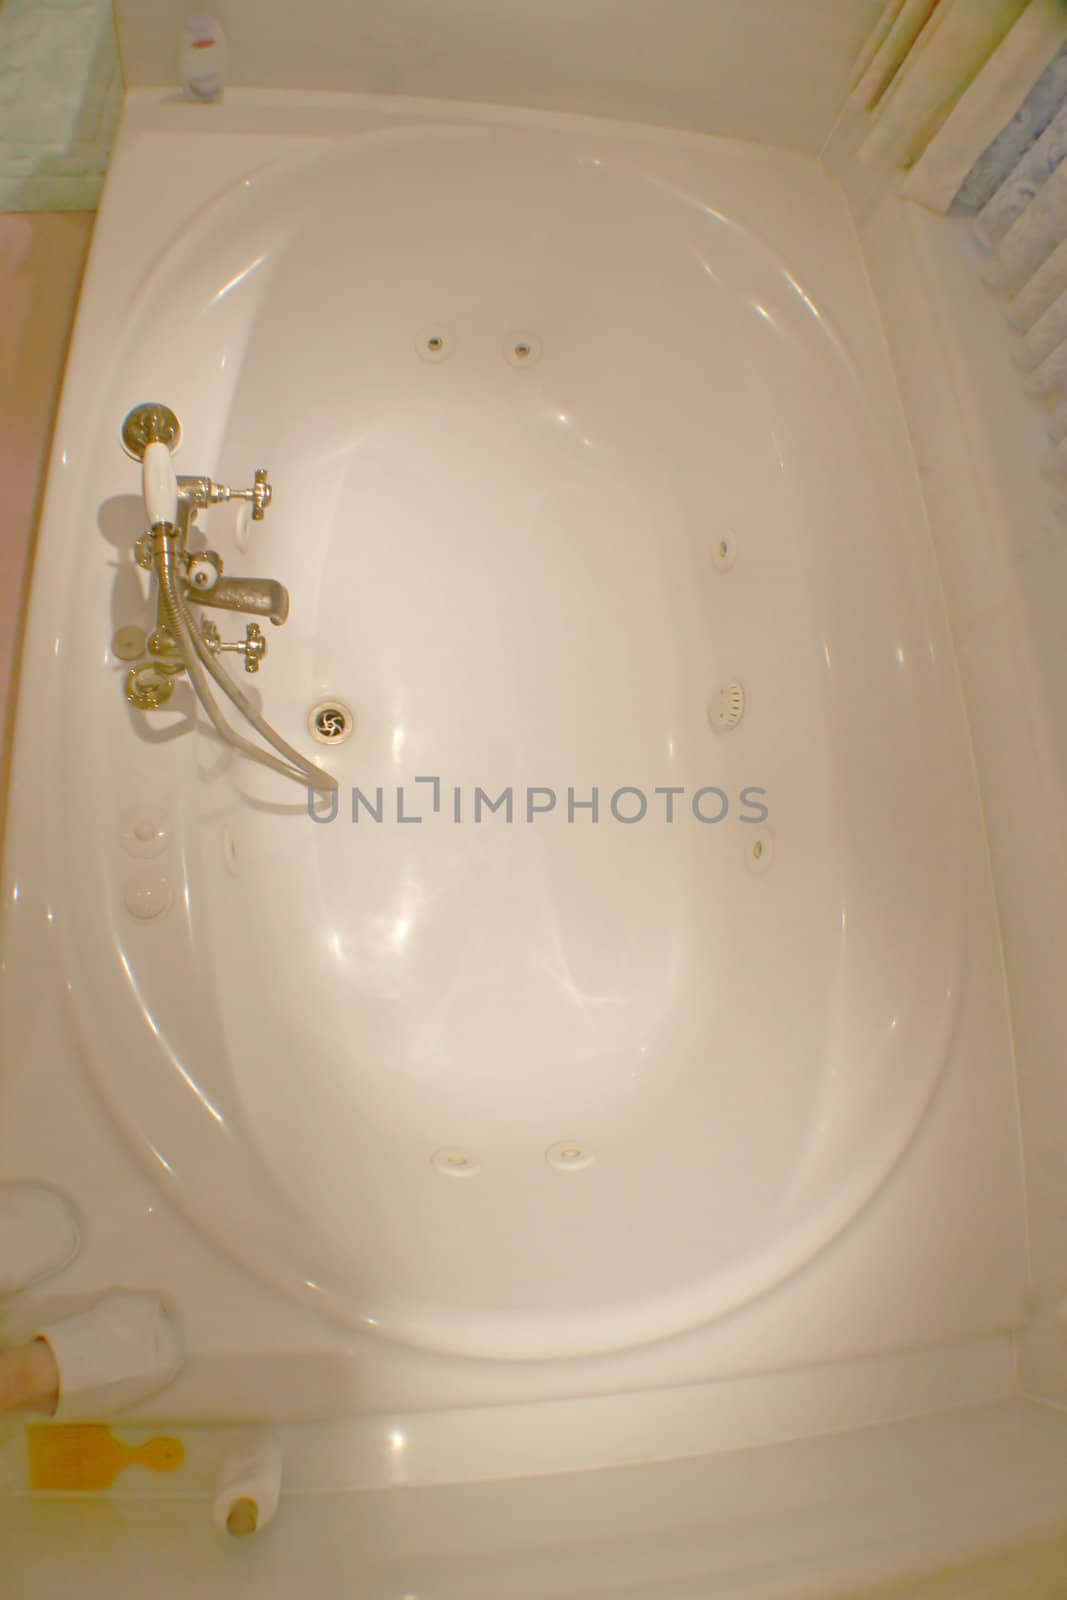 A photo of a bath tub from above.